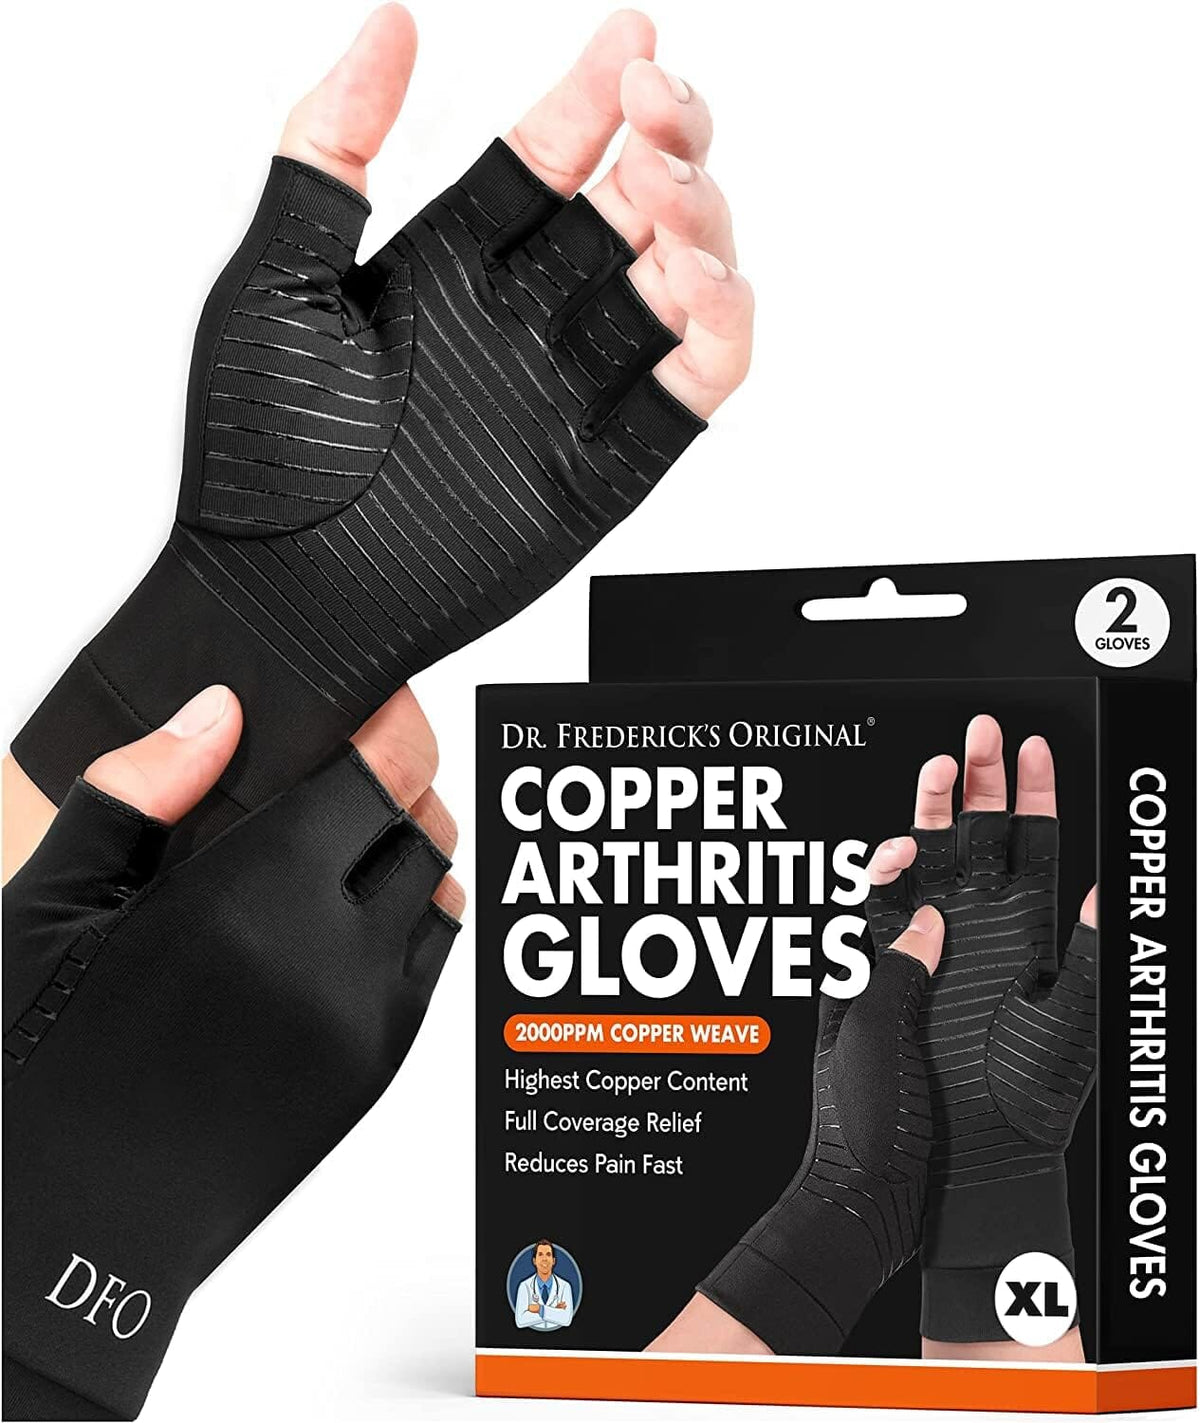 Dr. Frederick&#39;s Original Copper Arthritis Glove - 2 Gloves - Perfect Computer Typing Gloves - Fit Guaranteed Hand Pain Dr. Frederick&#39;s Original Extra Large 